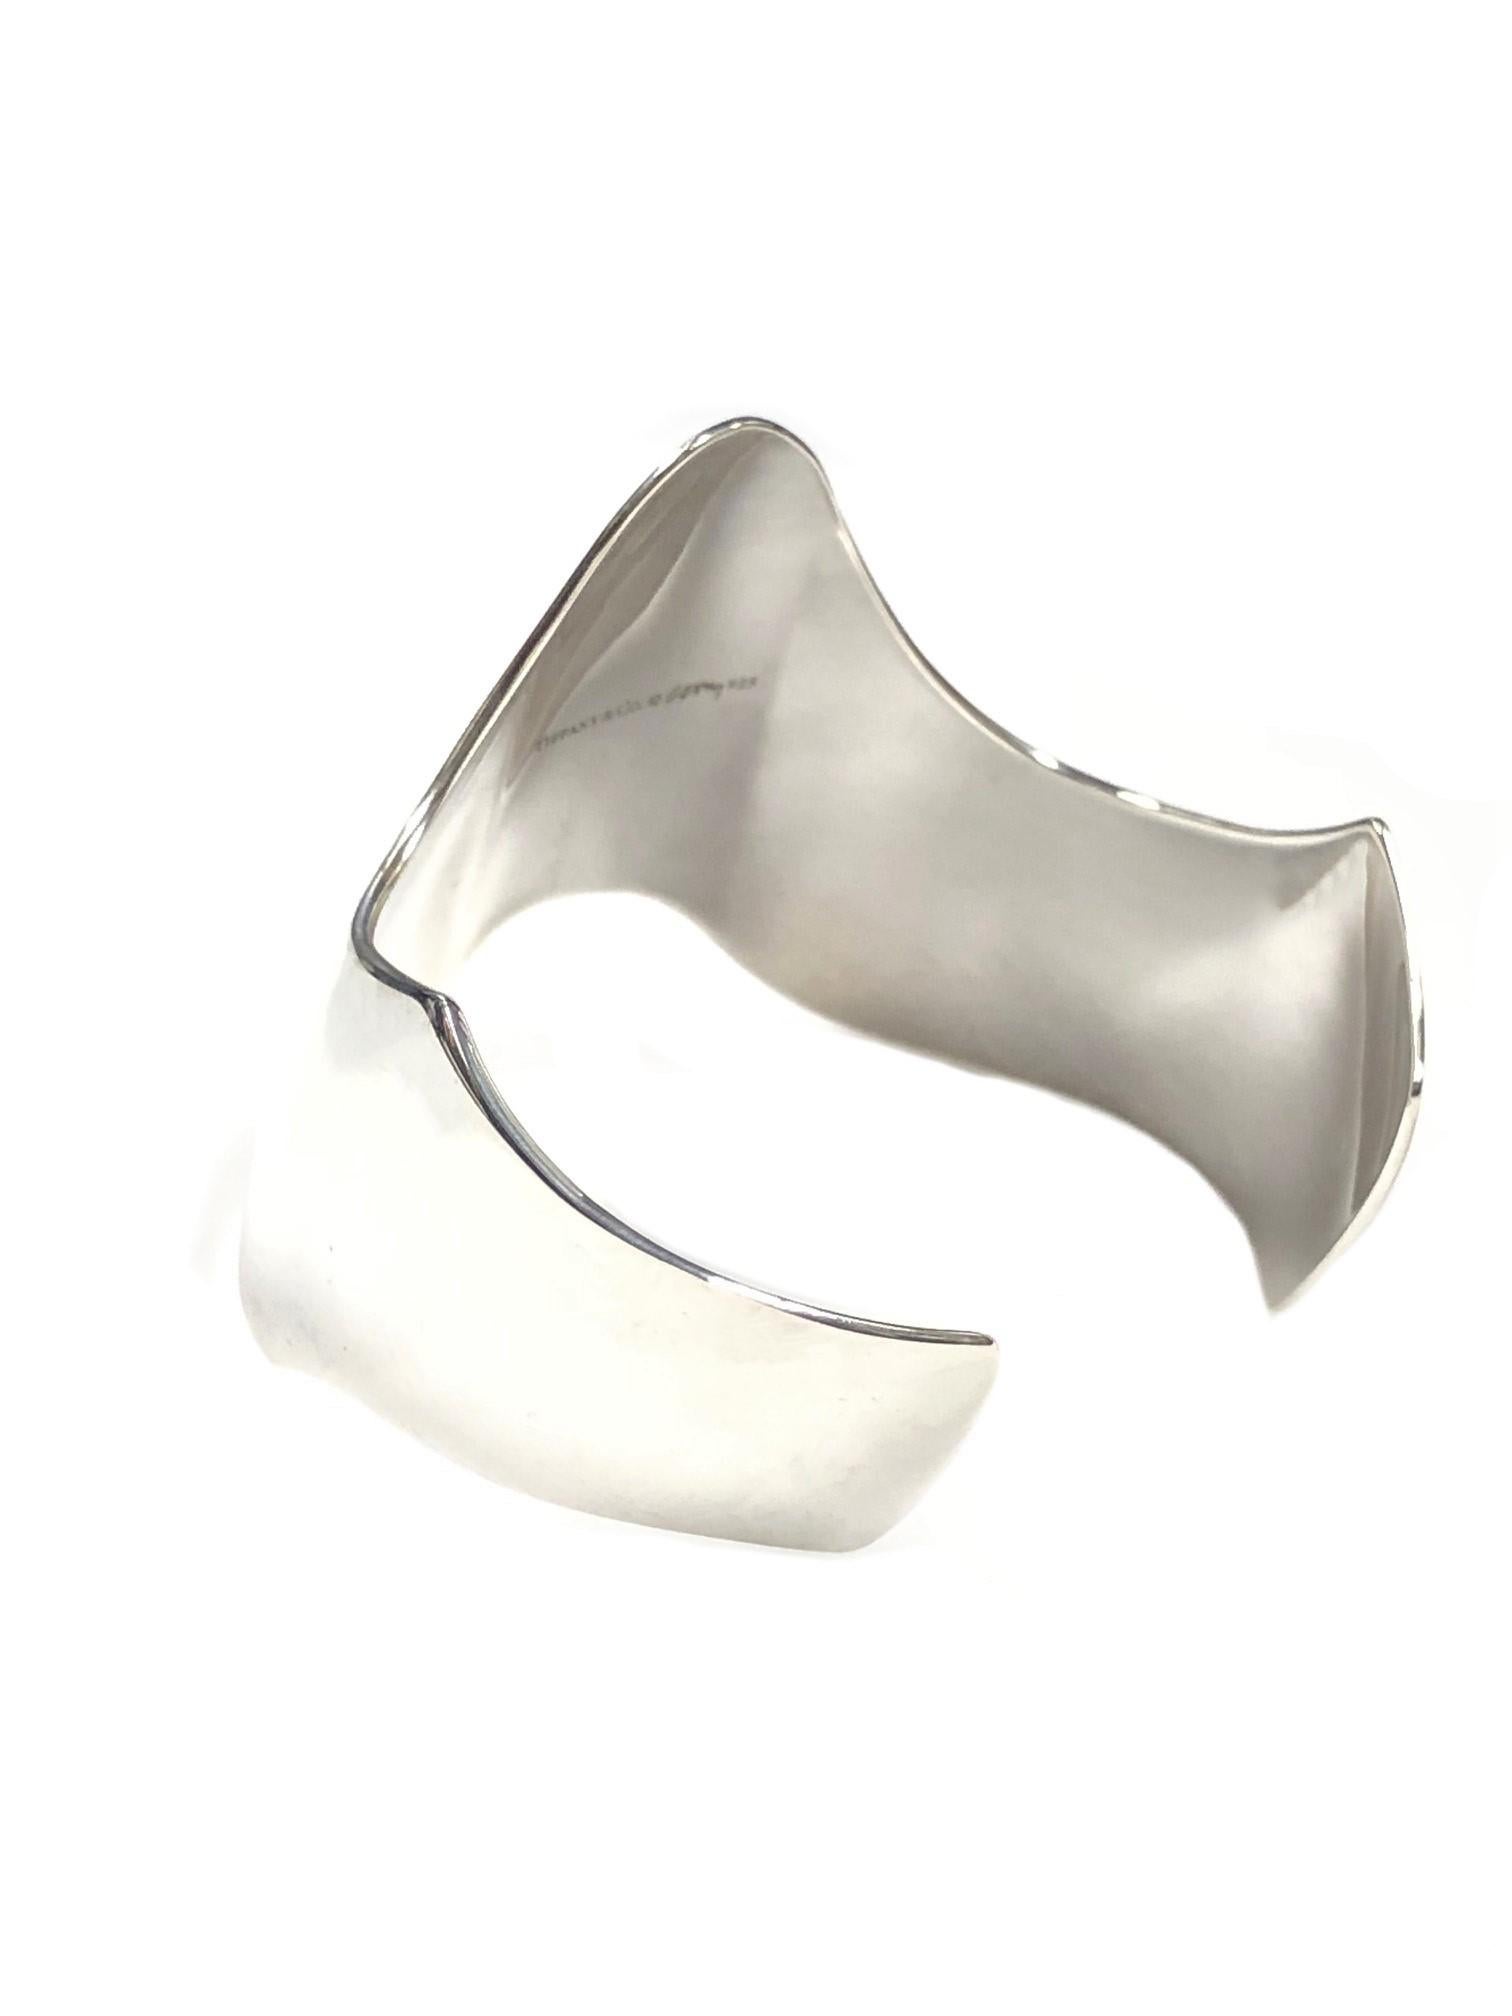 Circa 2000 Frank Gehry for Tiffany & Company Sterling Silver Cuff Bracelet, in an eccentric design and measuring 2 inches wide with an opening of 1 1/4 inch. Inside measurement approximately 7 inches. 